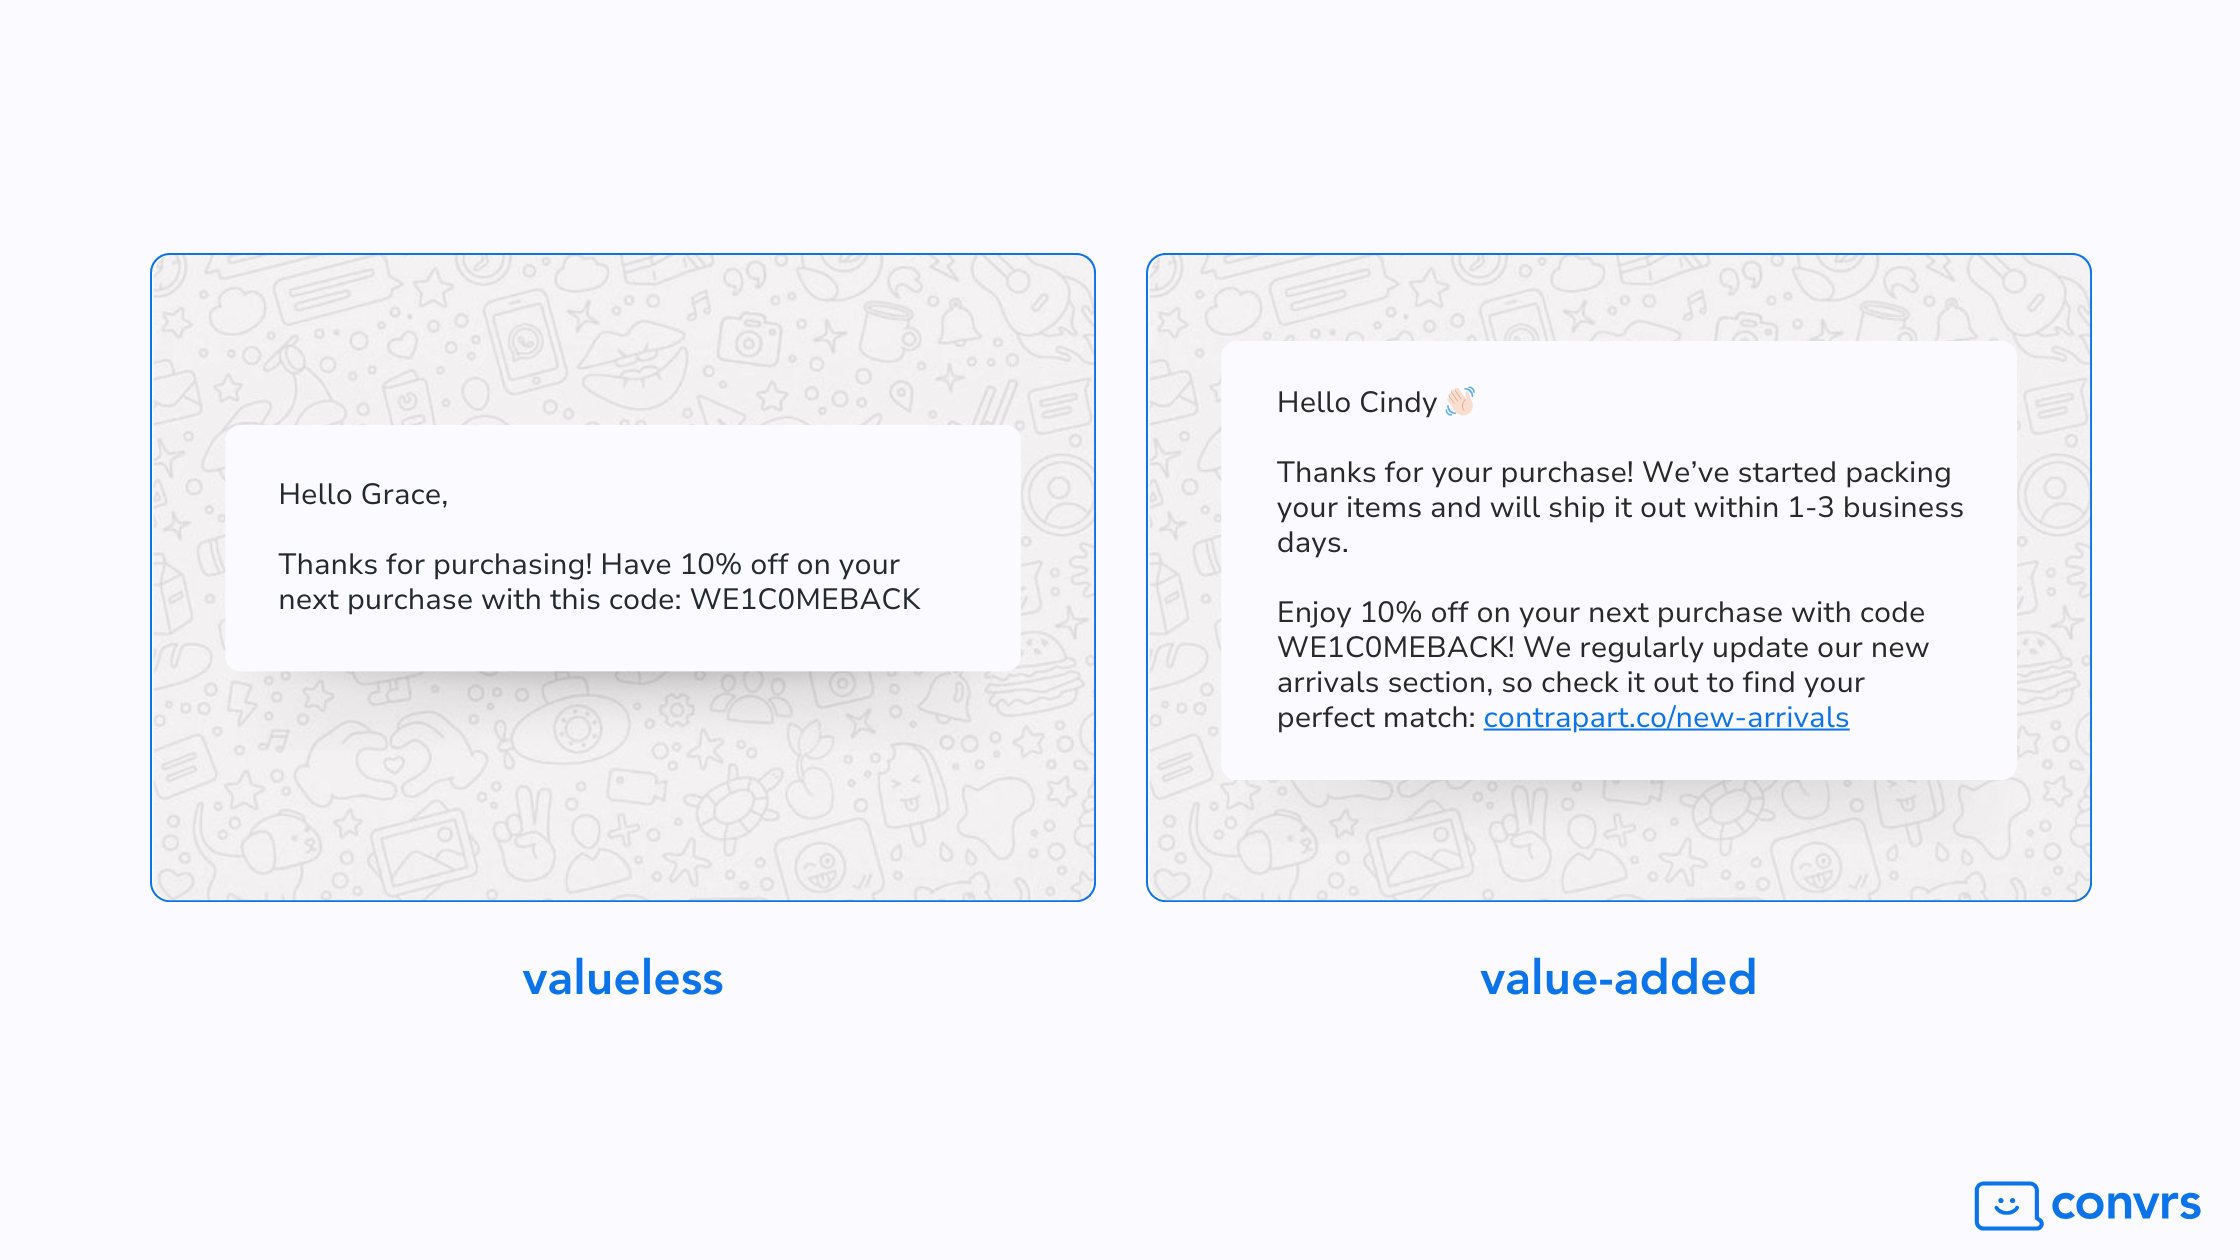 Visual comparing a valueless message versus a value-added message